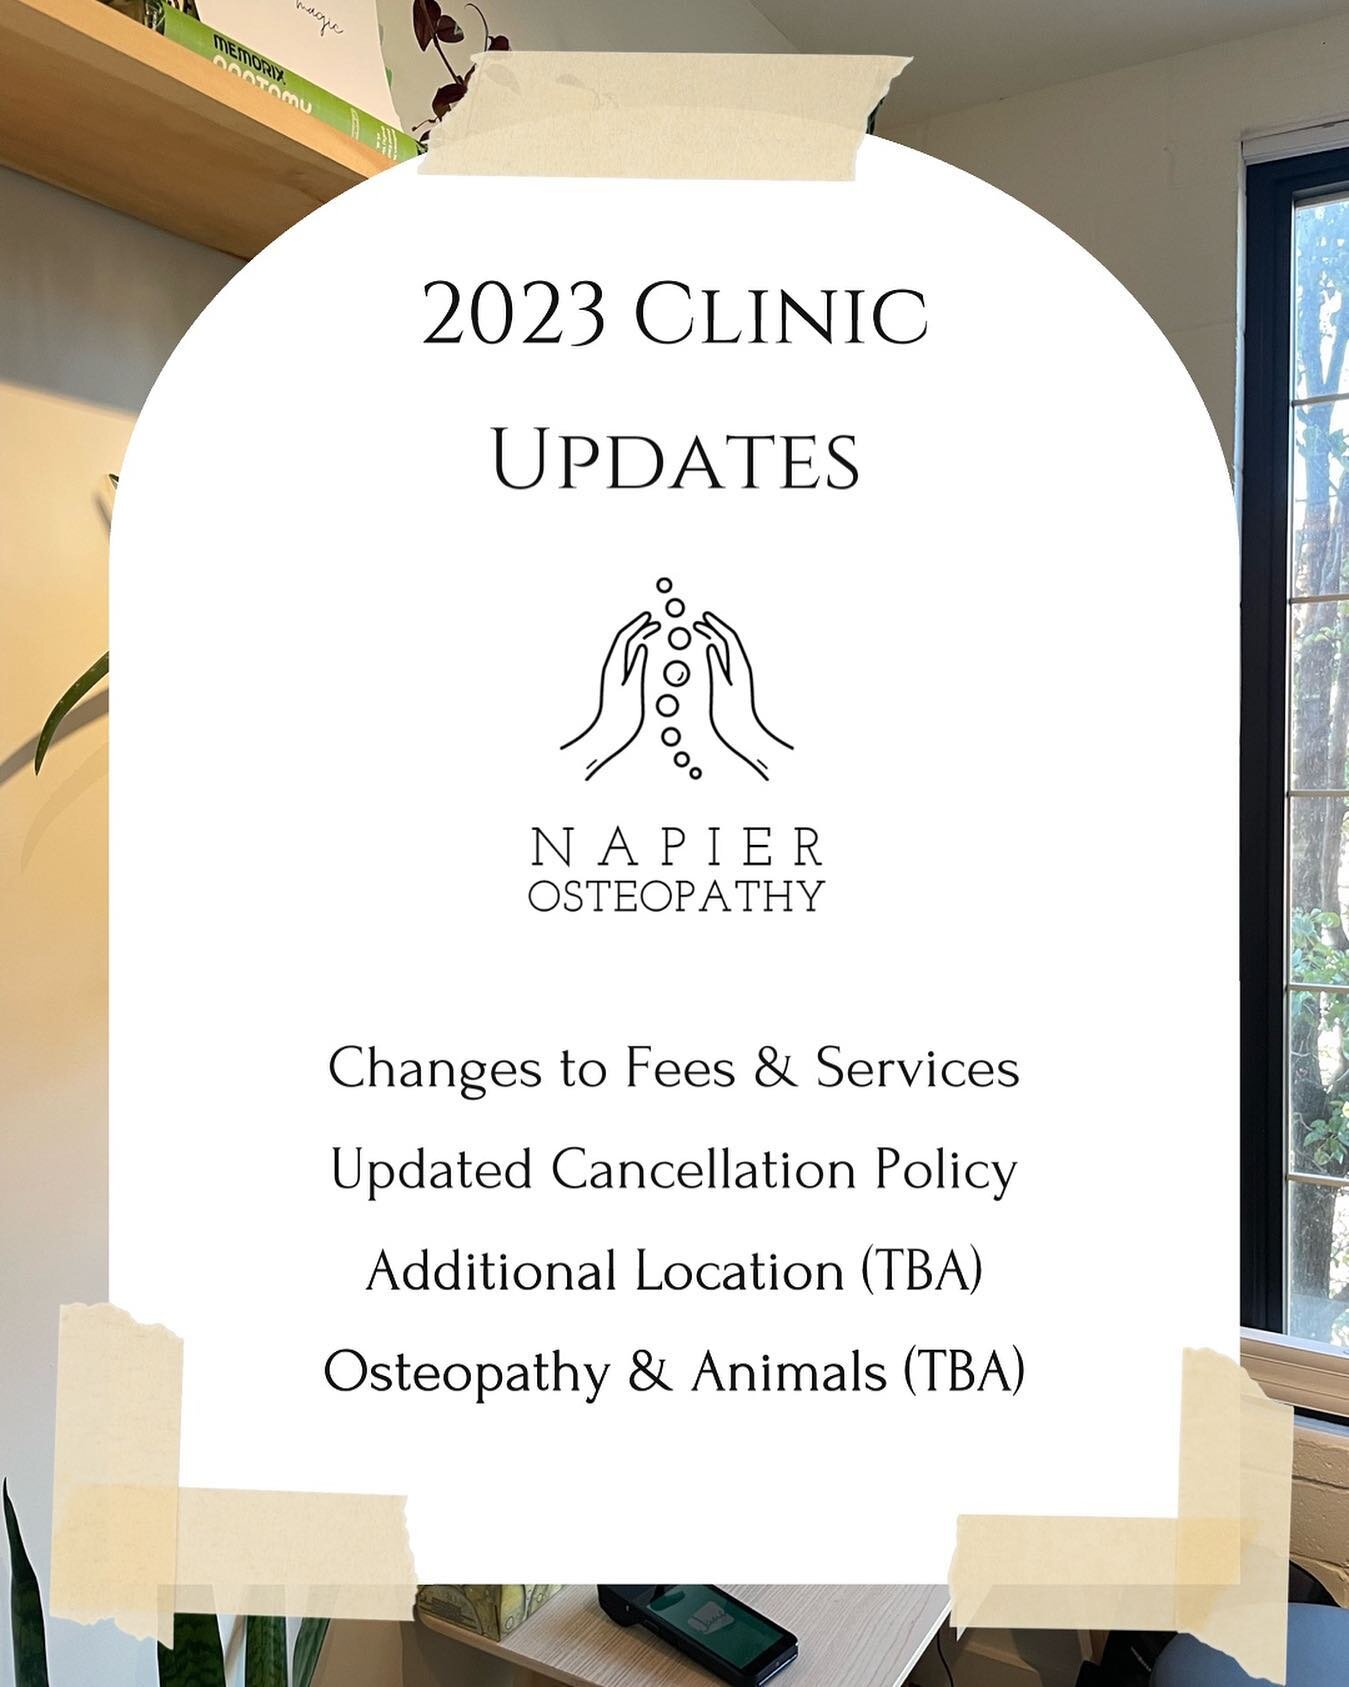 Clinical Updates in the upcoming months!

Thank you all for a wonderful 2022 and I look forward to more health and happiness this year 😁

All information can be found on my website in the &ldquo;What&rsquo;s New&rdquo; section located in the link in